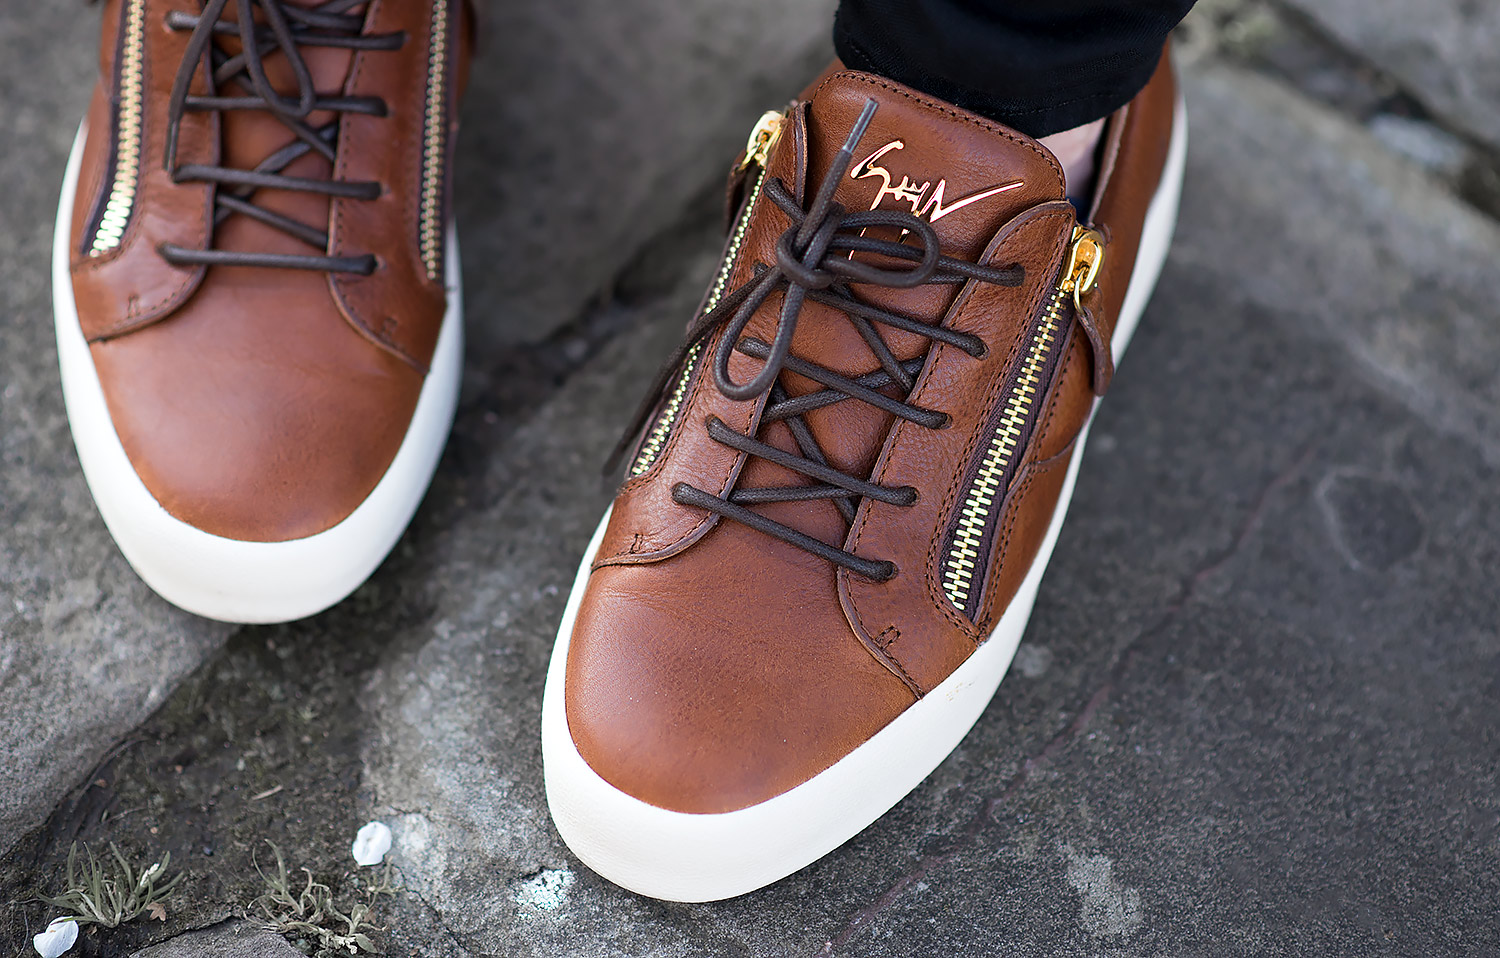 Giuseppe Zanotti Frankie Low Top Sneakers Review - Your Average Guy